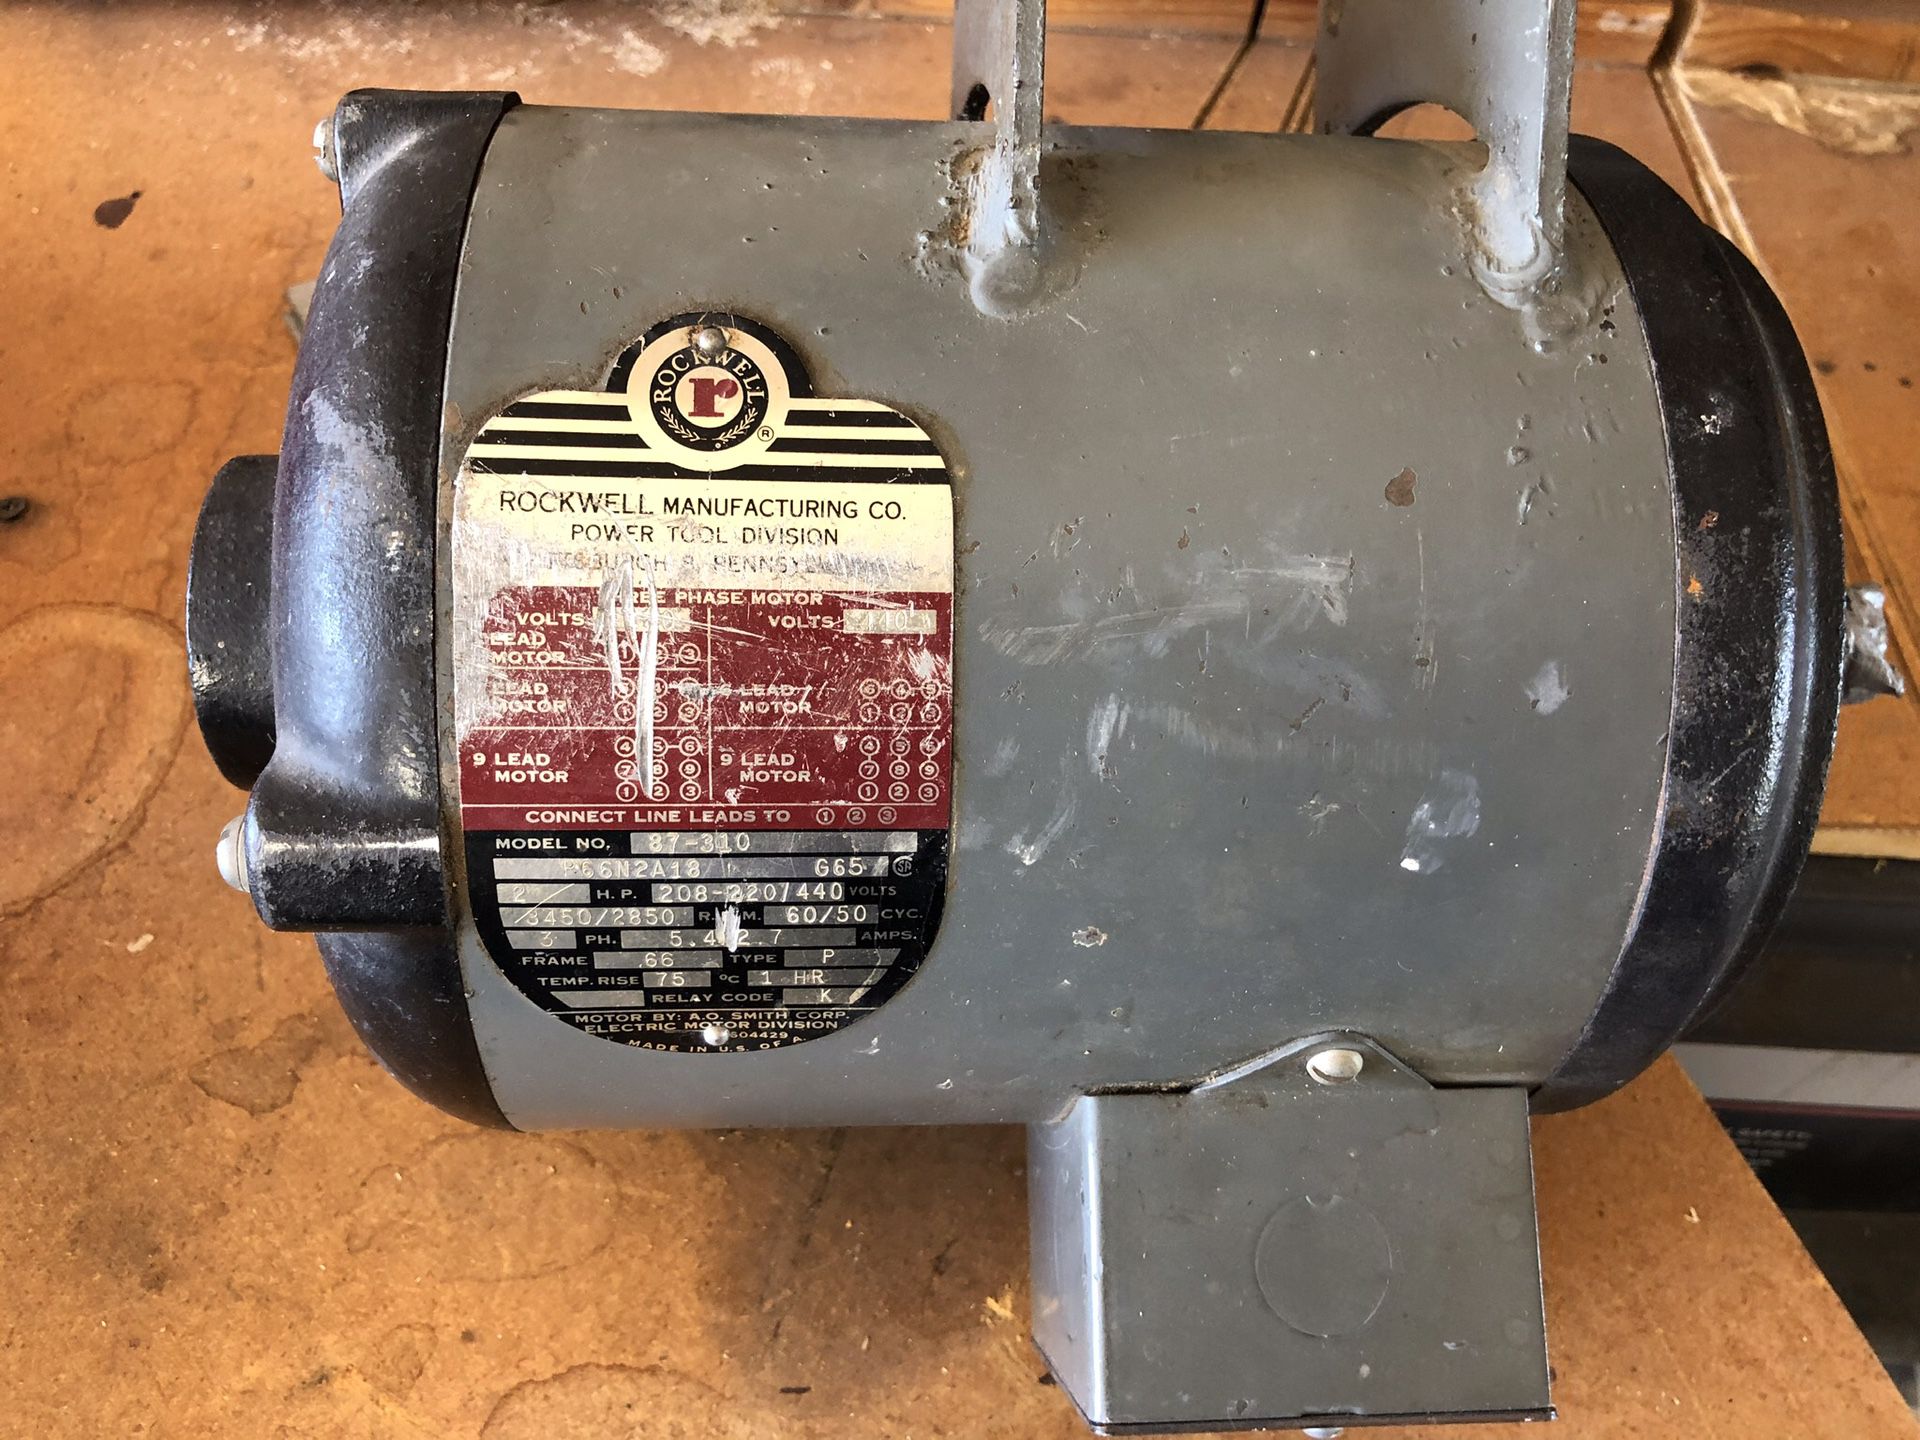 VINTAGE Delta Rockwell Unisaw 3 Phase Motor. 2 HP, 3450 RPM. Model 87-310. Used as table saw.